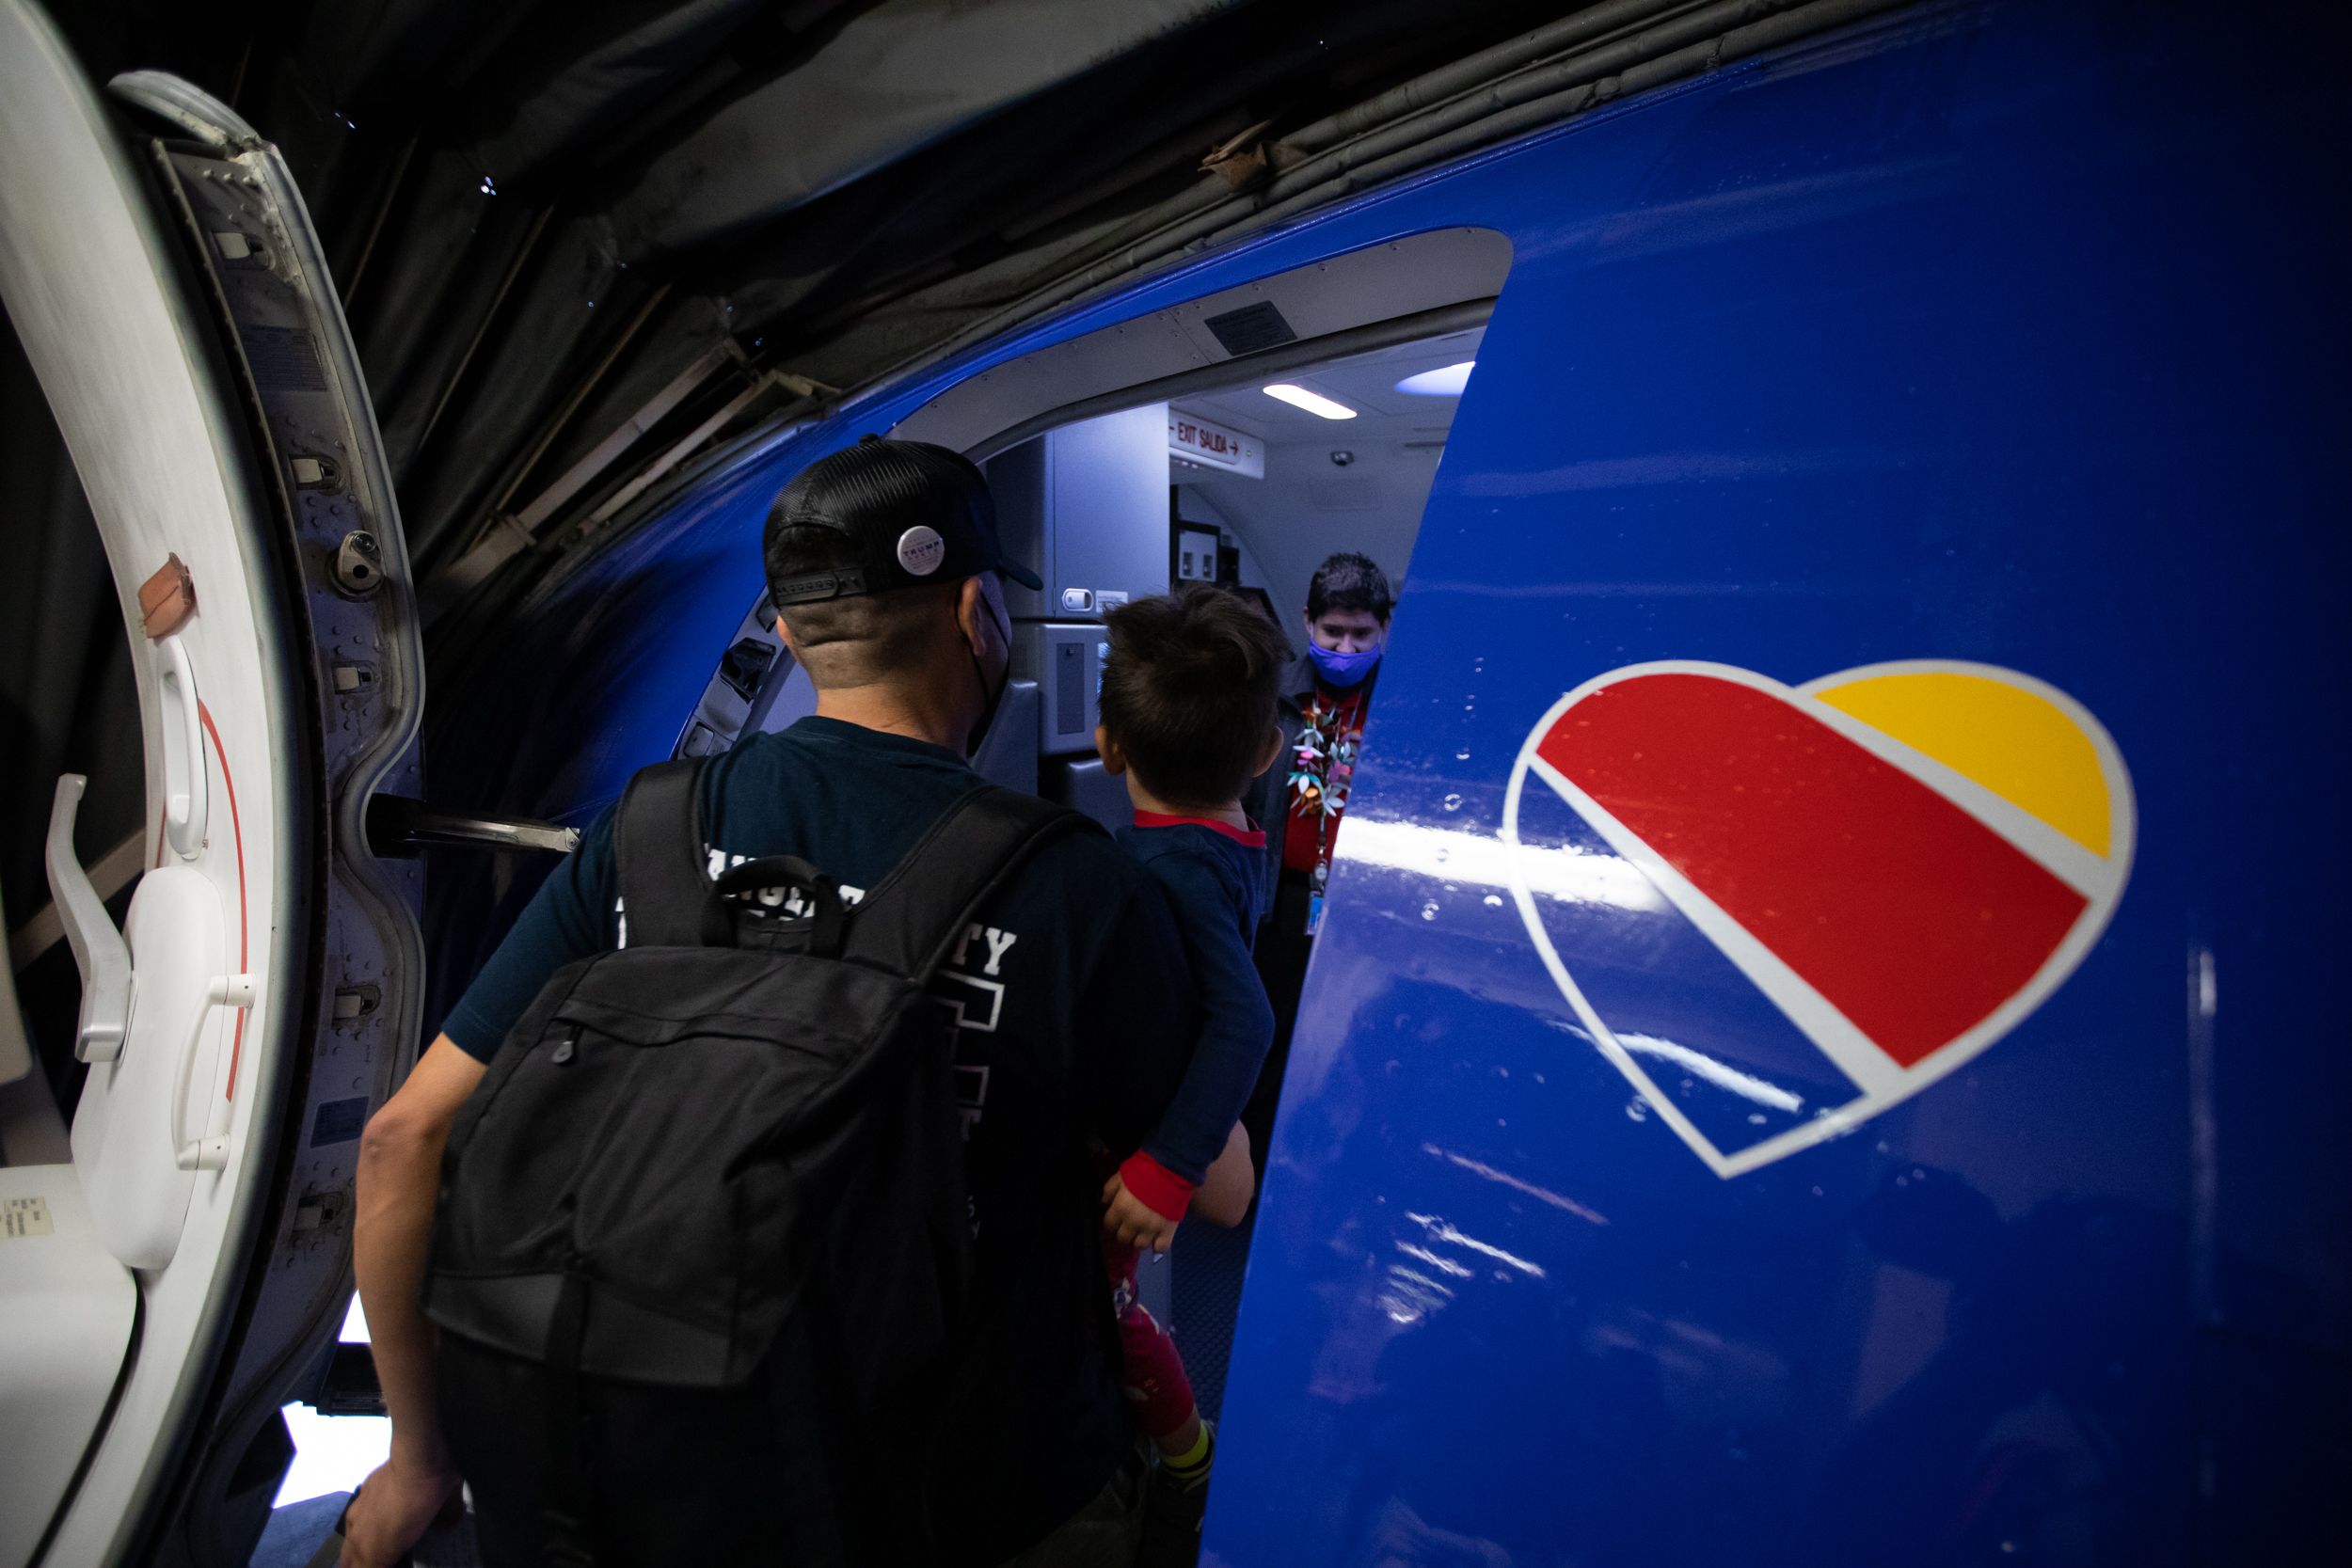 A Father and child board a Southwest Airlines Boeing 737